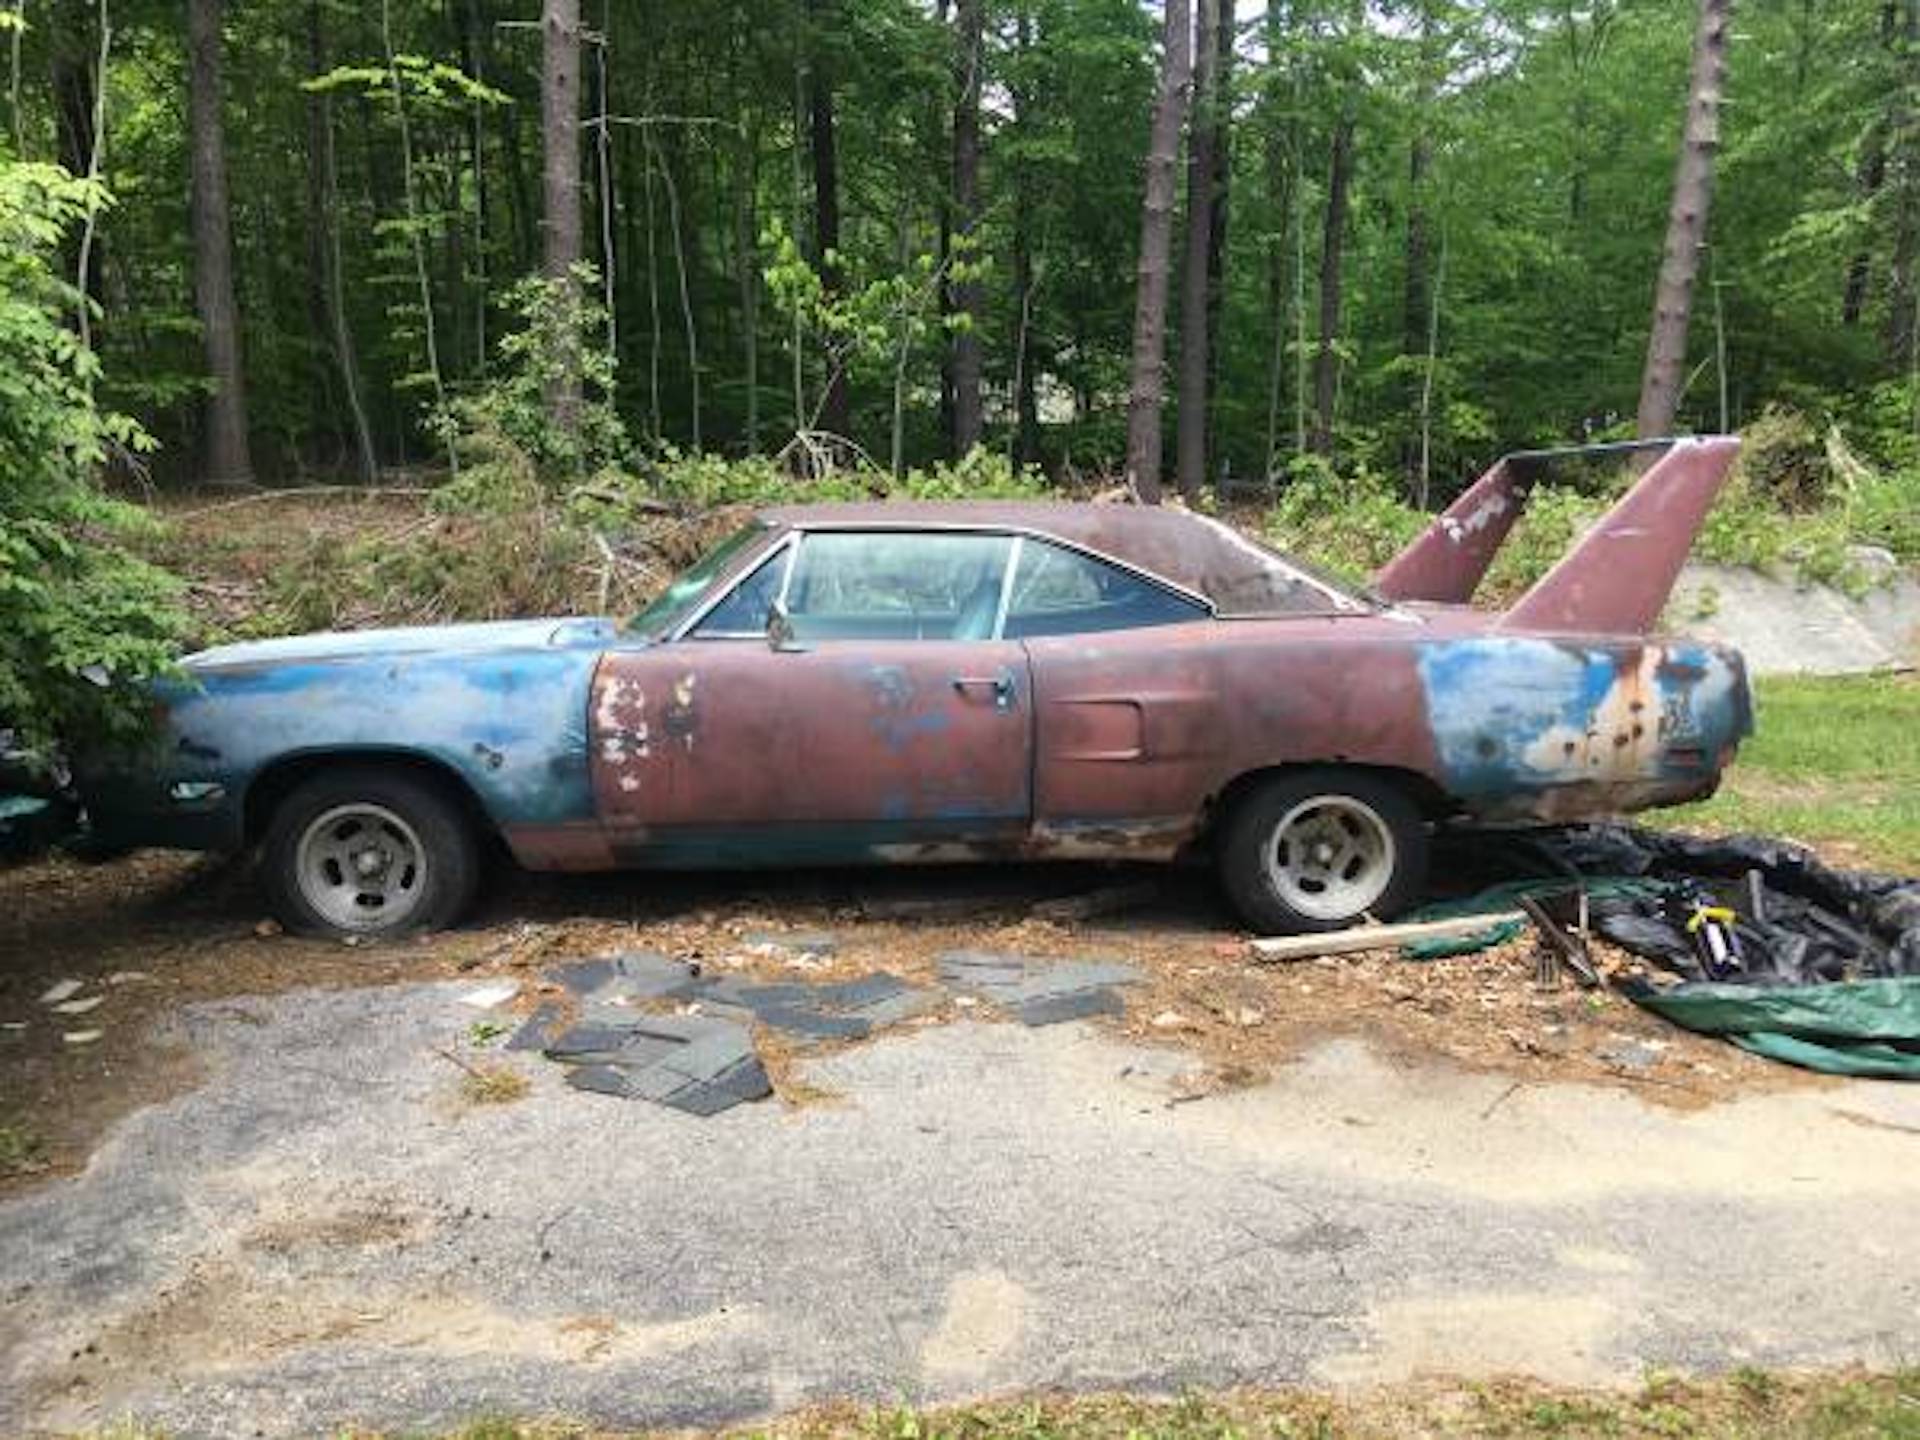 Rusty 1970 Plymouth Superbird Barn Find Is the Ultimate Muscle Car